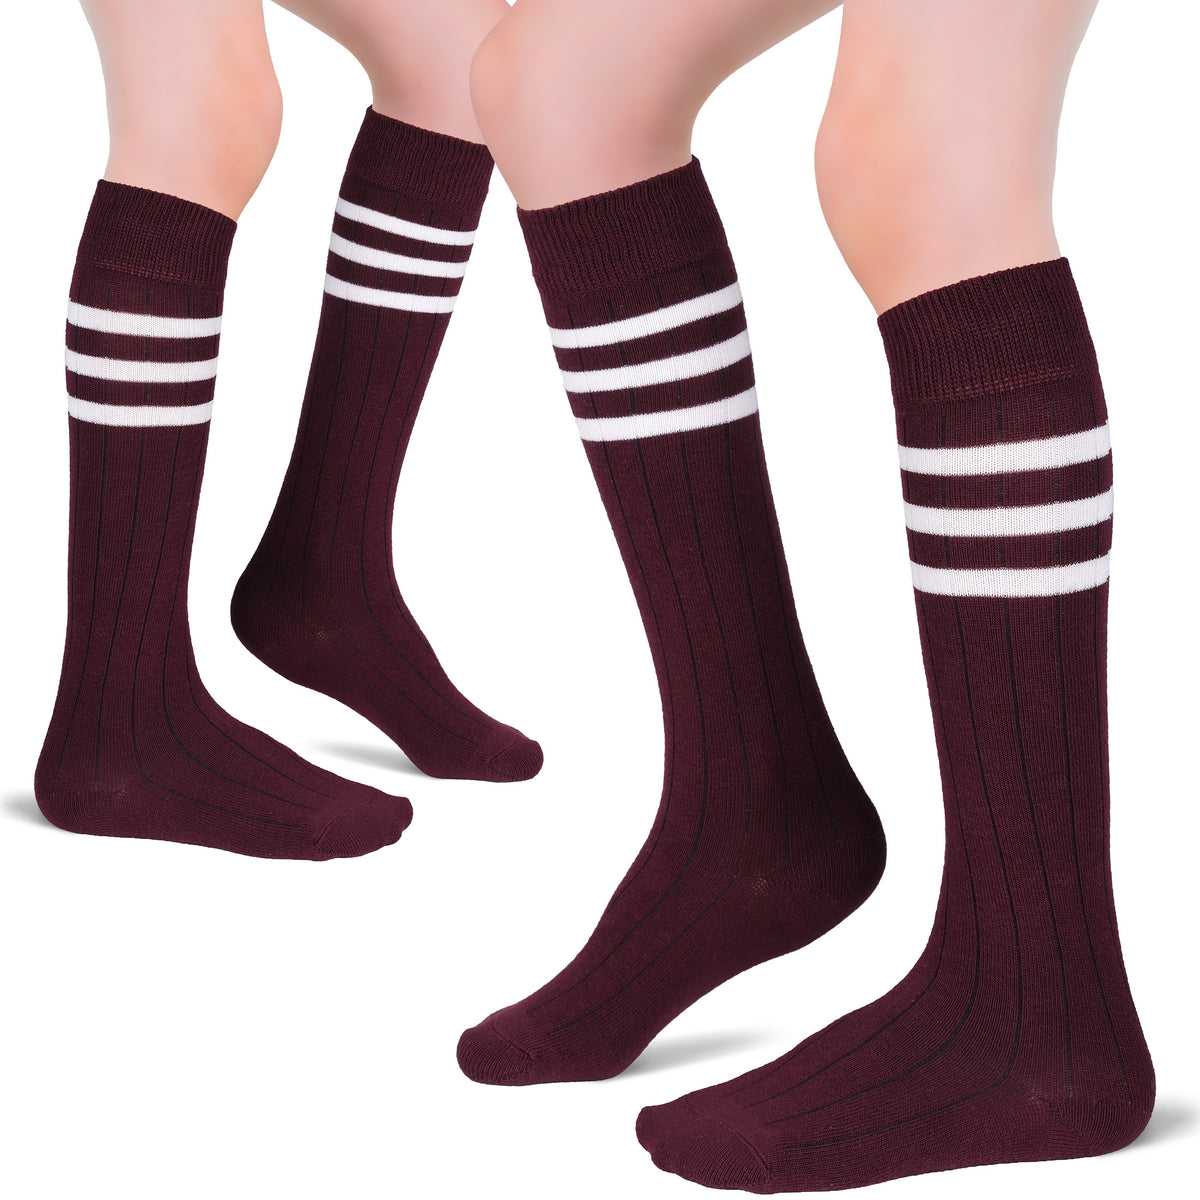 These Cotton Kids' Knee-High Socks feature two pairs of maroon socks with white stripes, perfect for any formal or casual occasion.